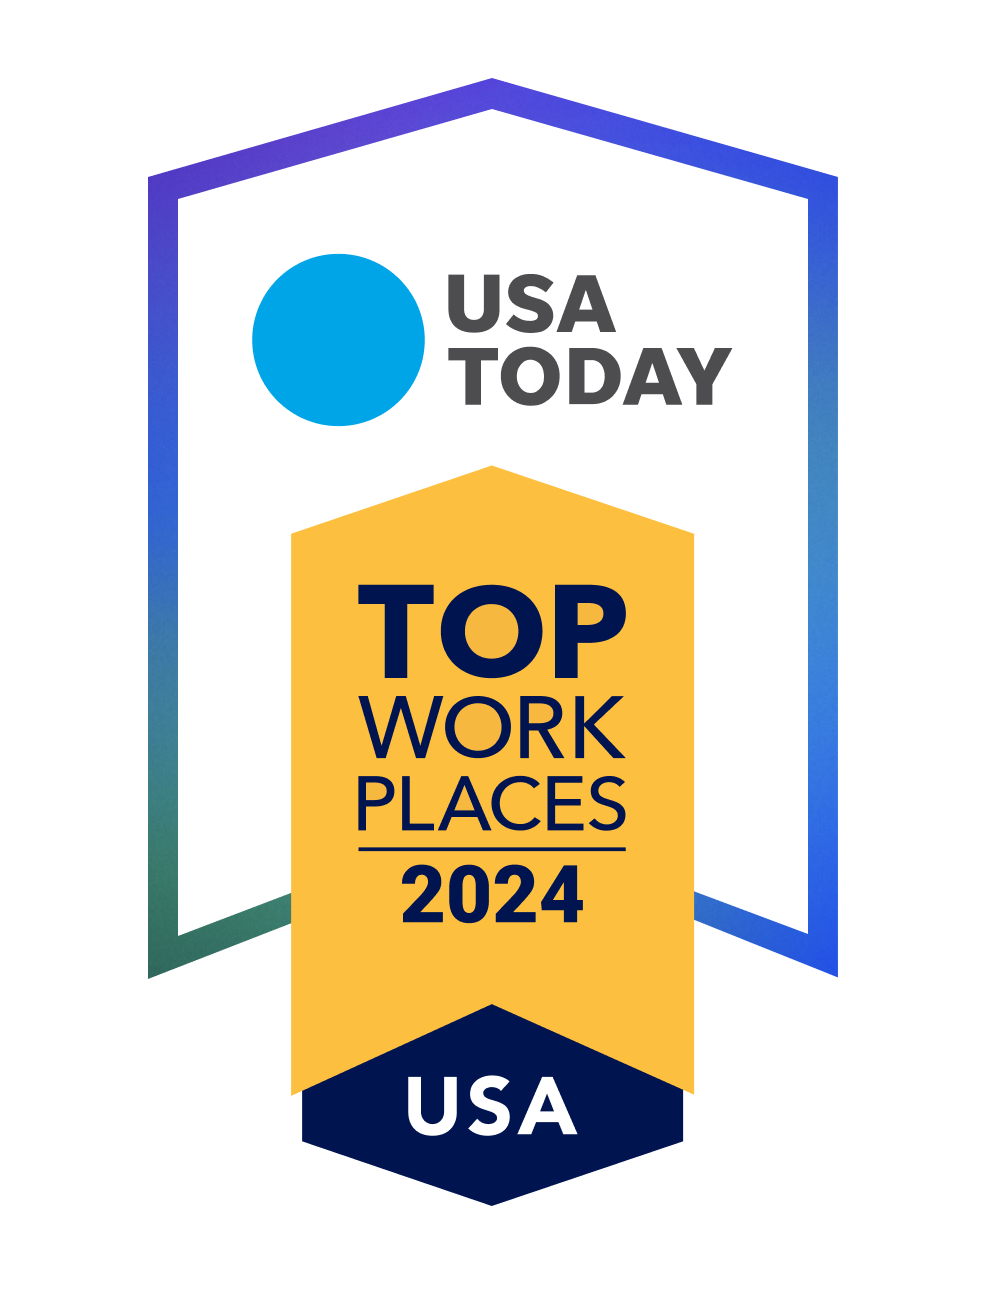 USA Today Top Workplaces 2024 logo